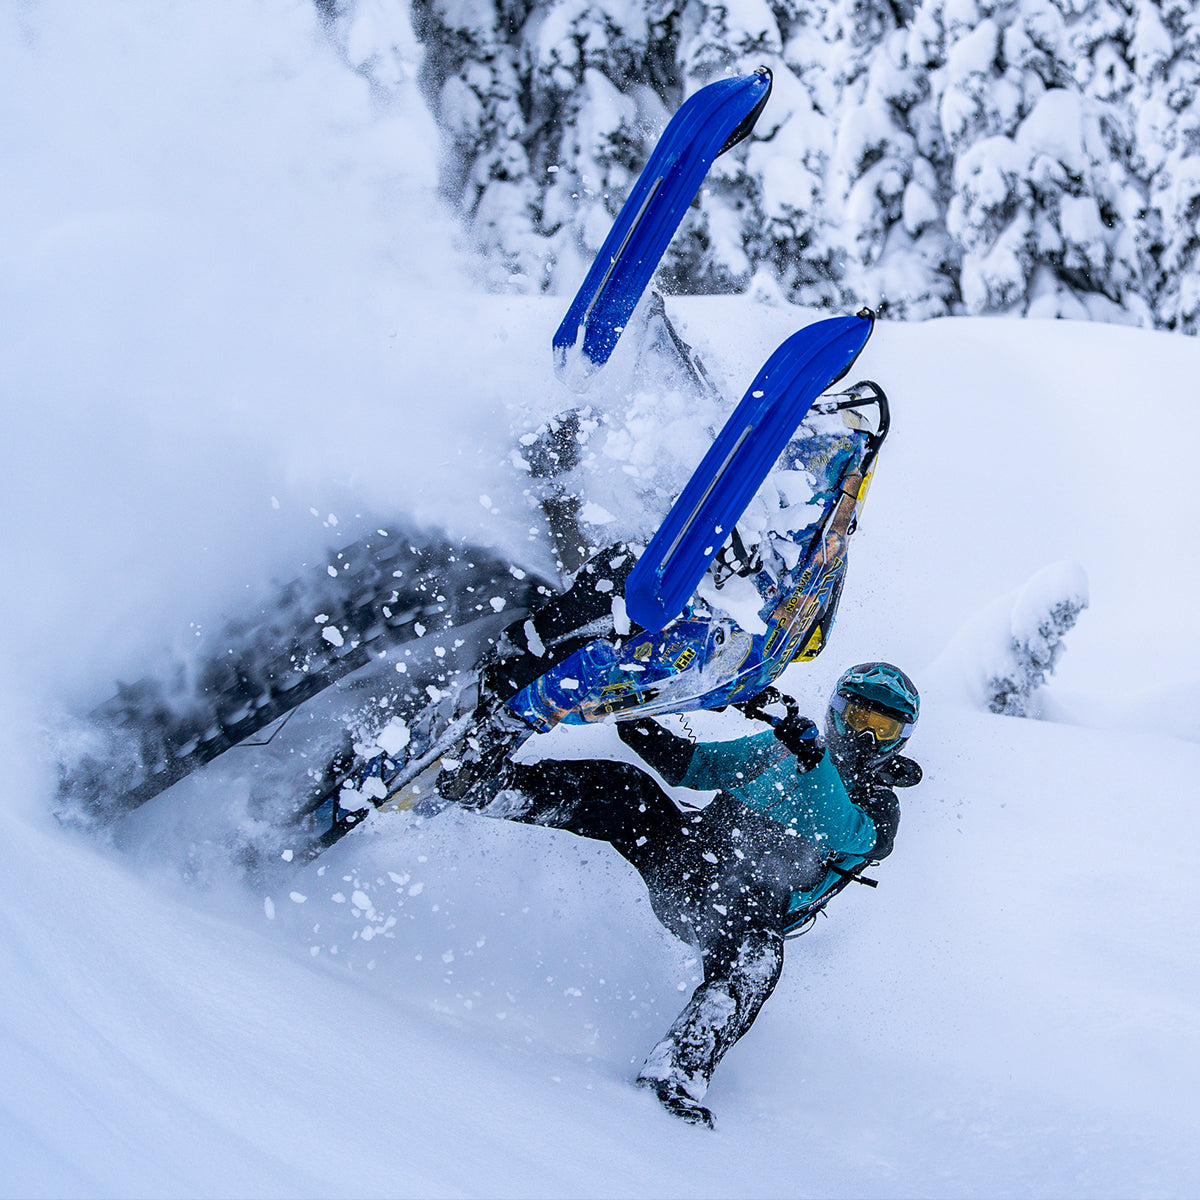 Backcountry professional rider Scott Eyer doing a backcountry trick on a snowmobile with C&A Pro BX mountain skis